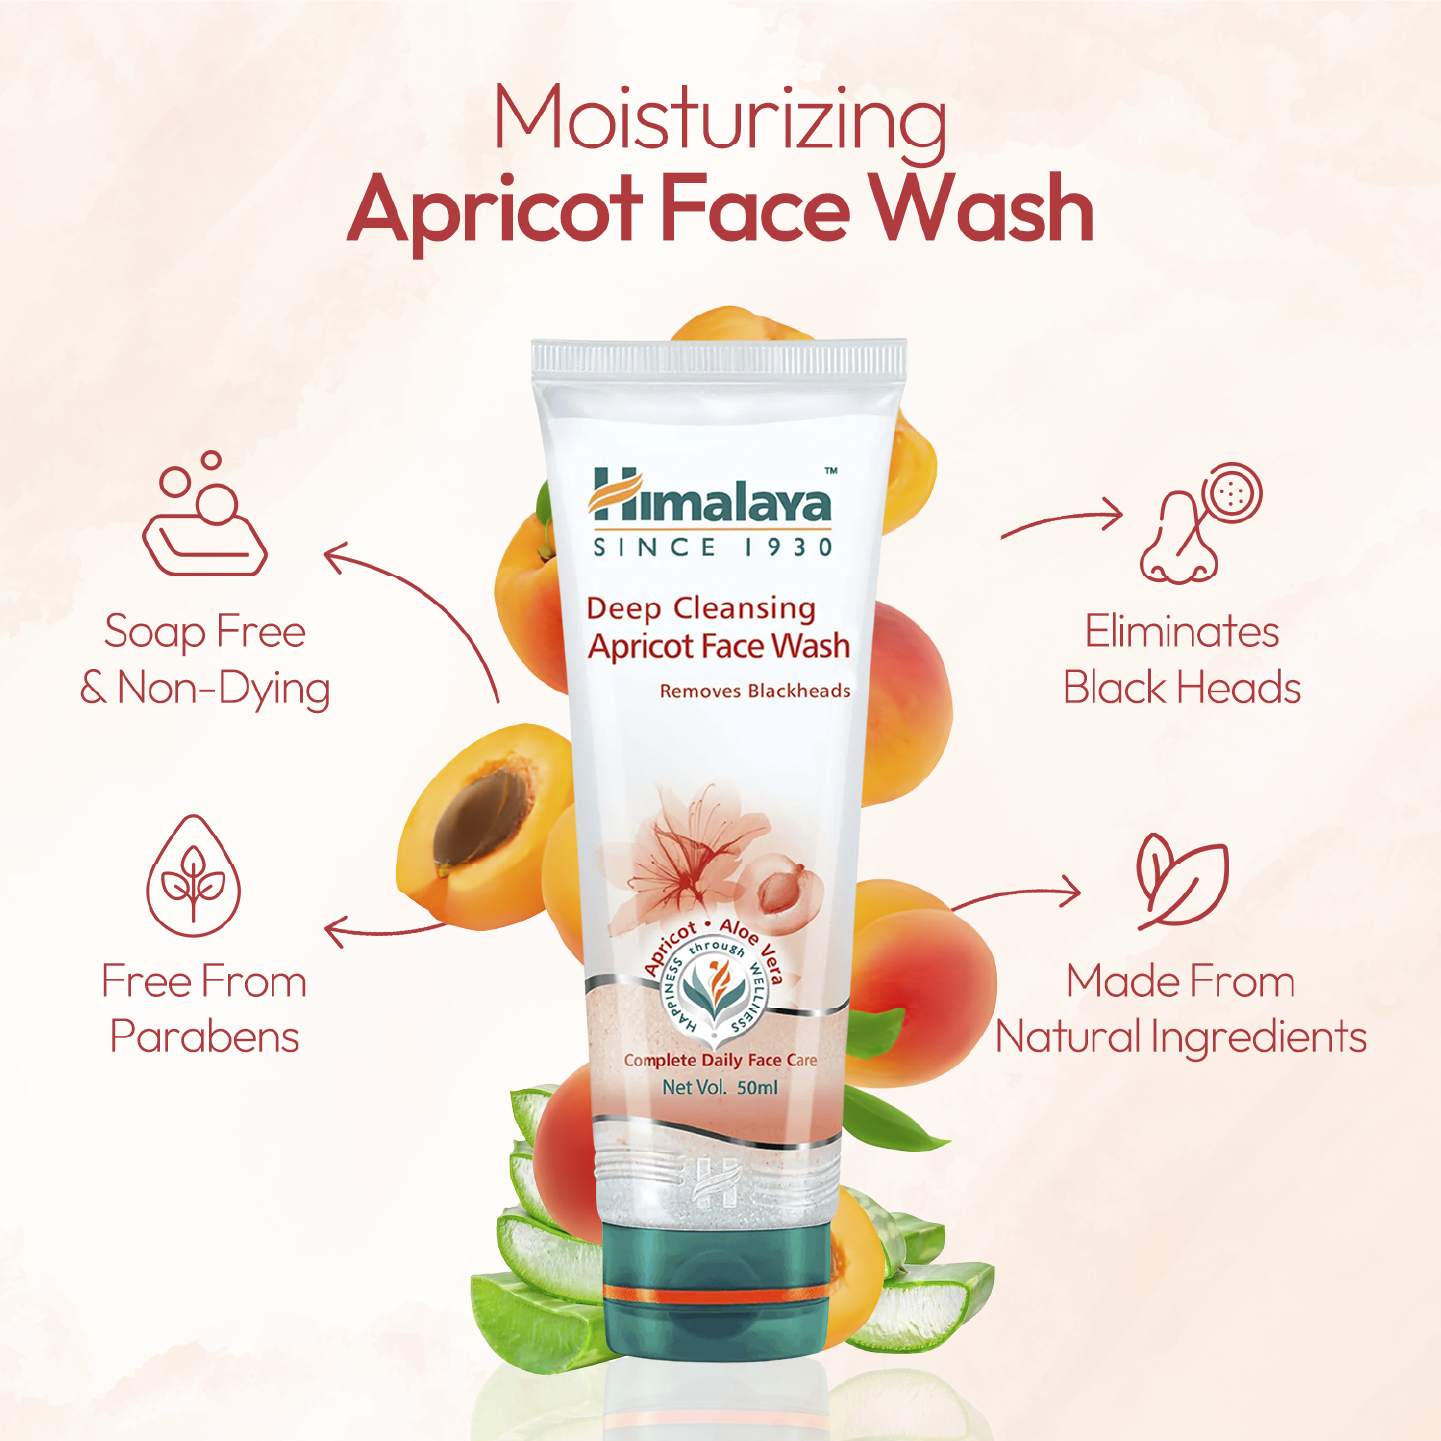 Deep Cleansing Apricot Face Wash